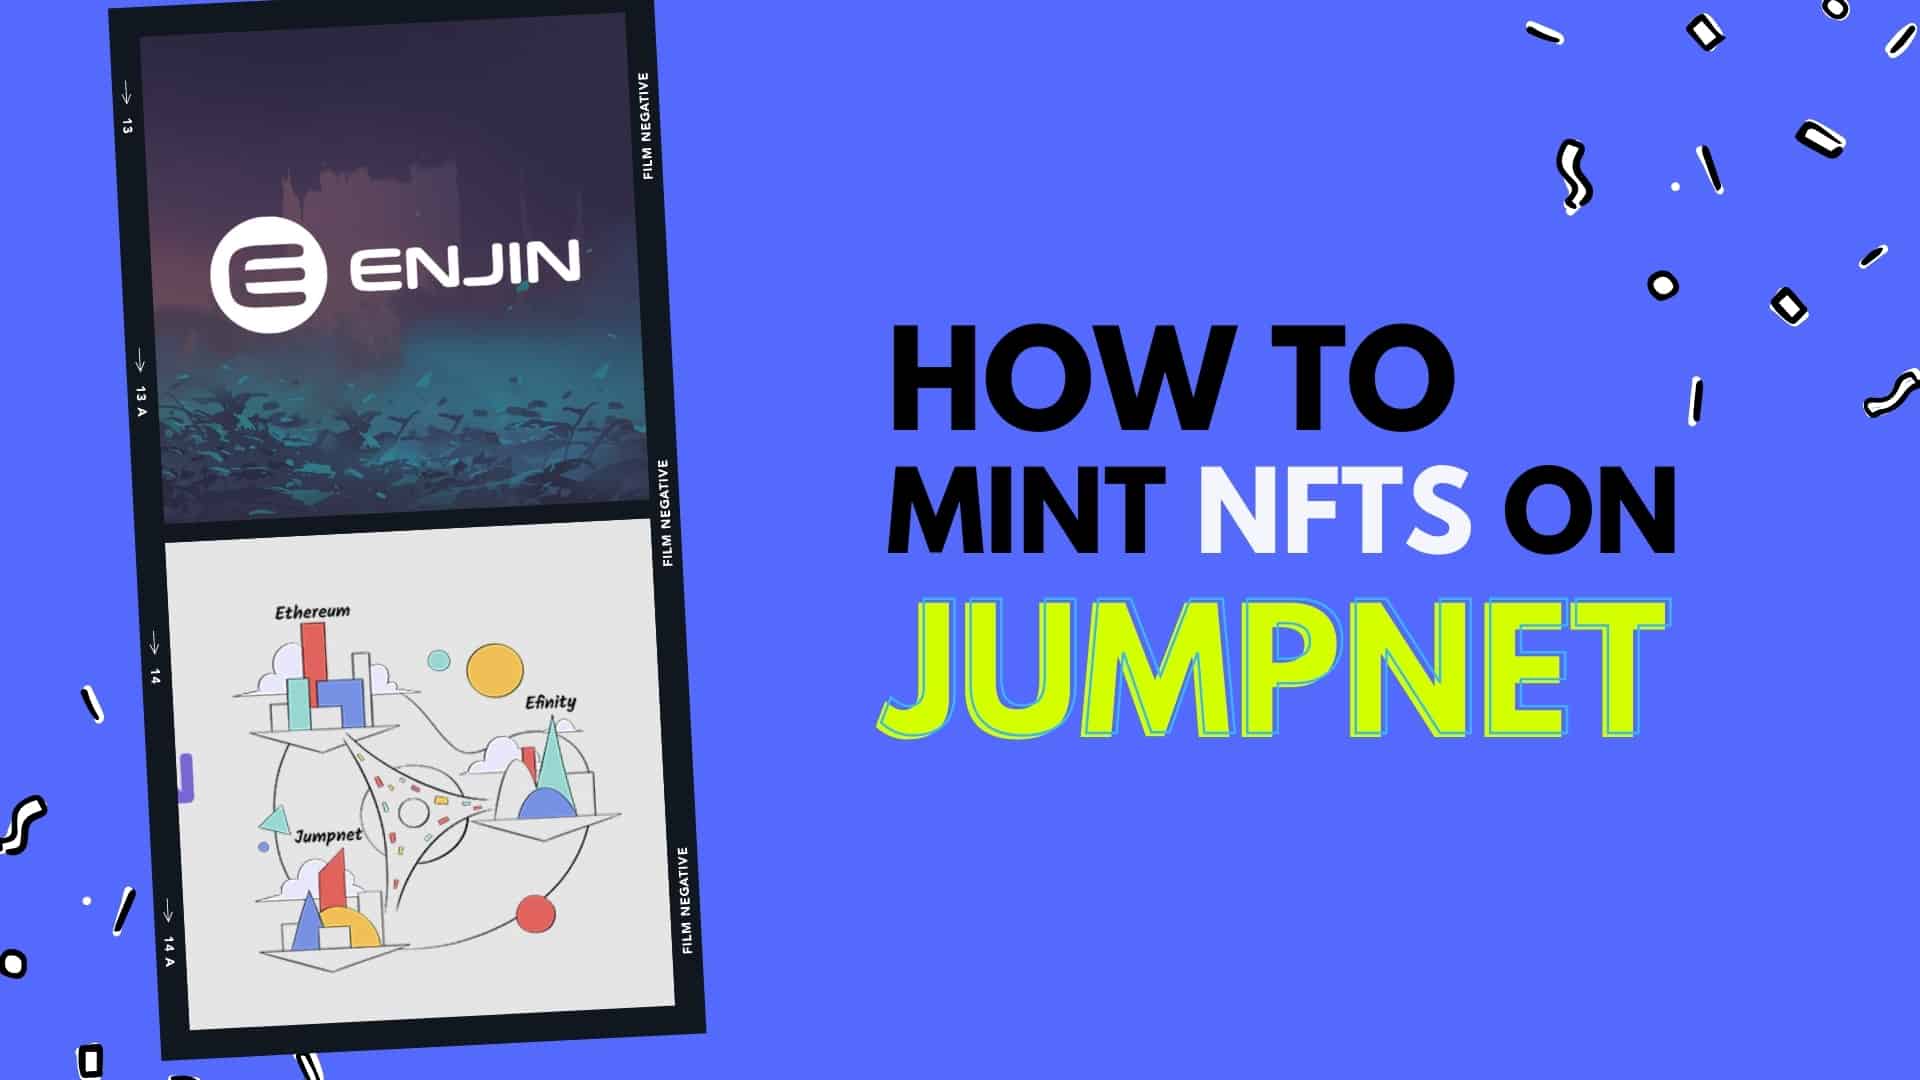 How to Mint NFTs on Jumpnet